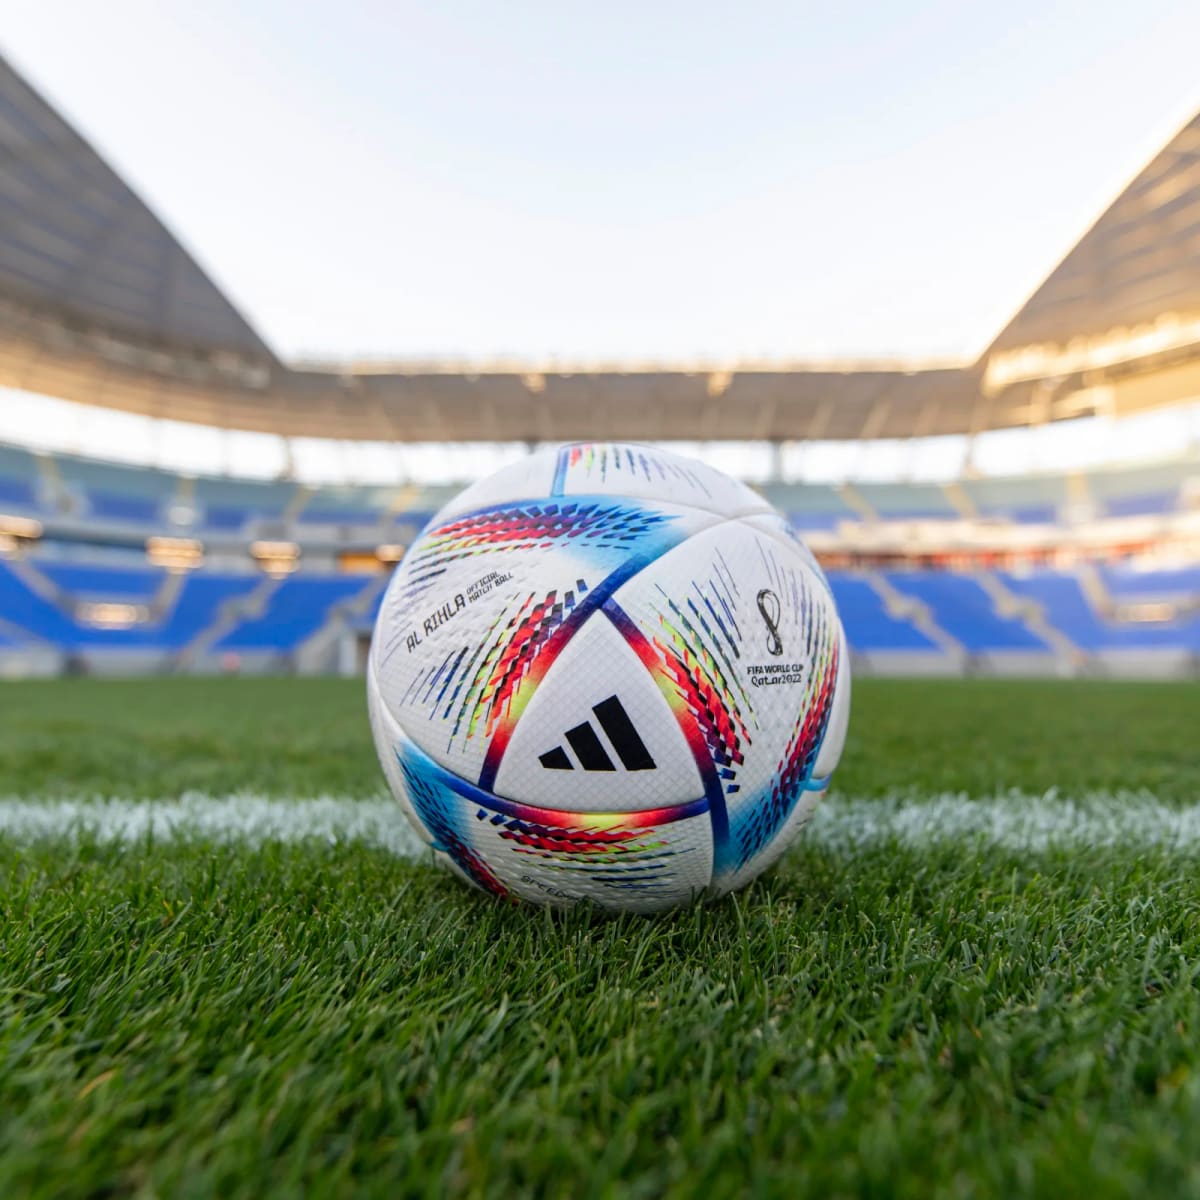 Adidas Al Rihla is official match ball of World Cup 2022